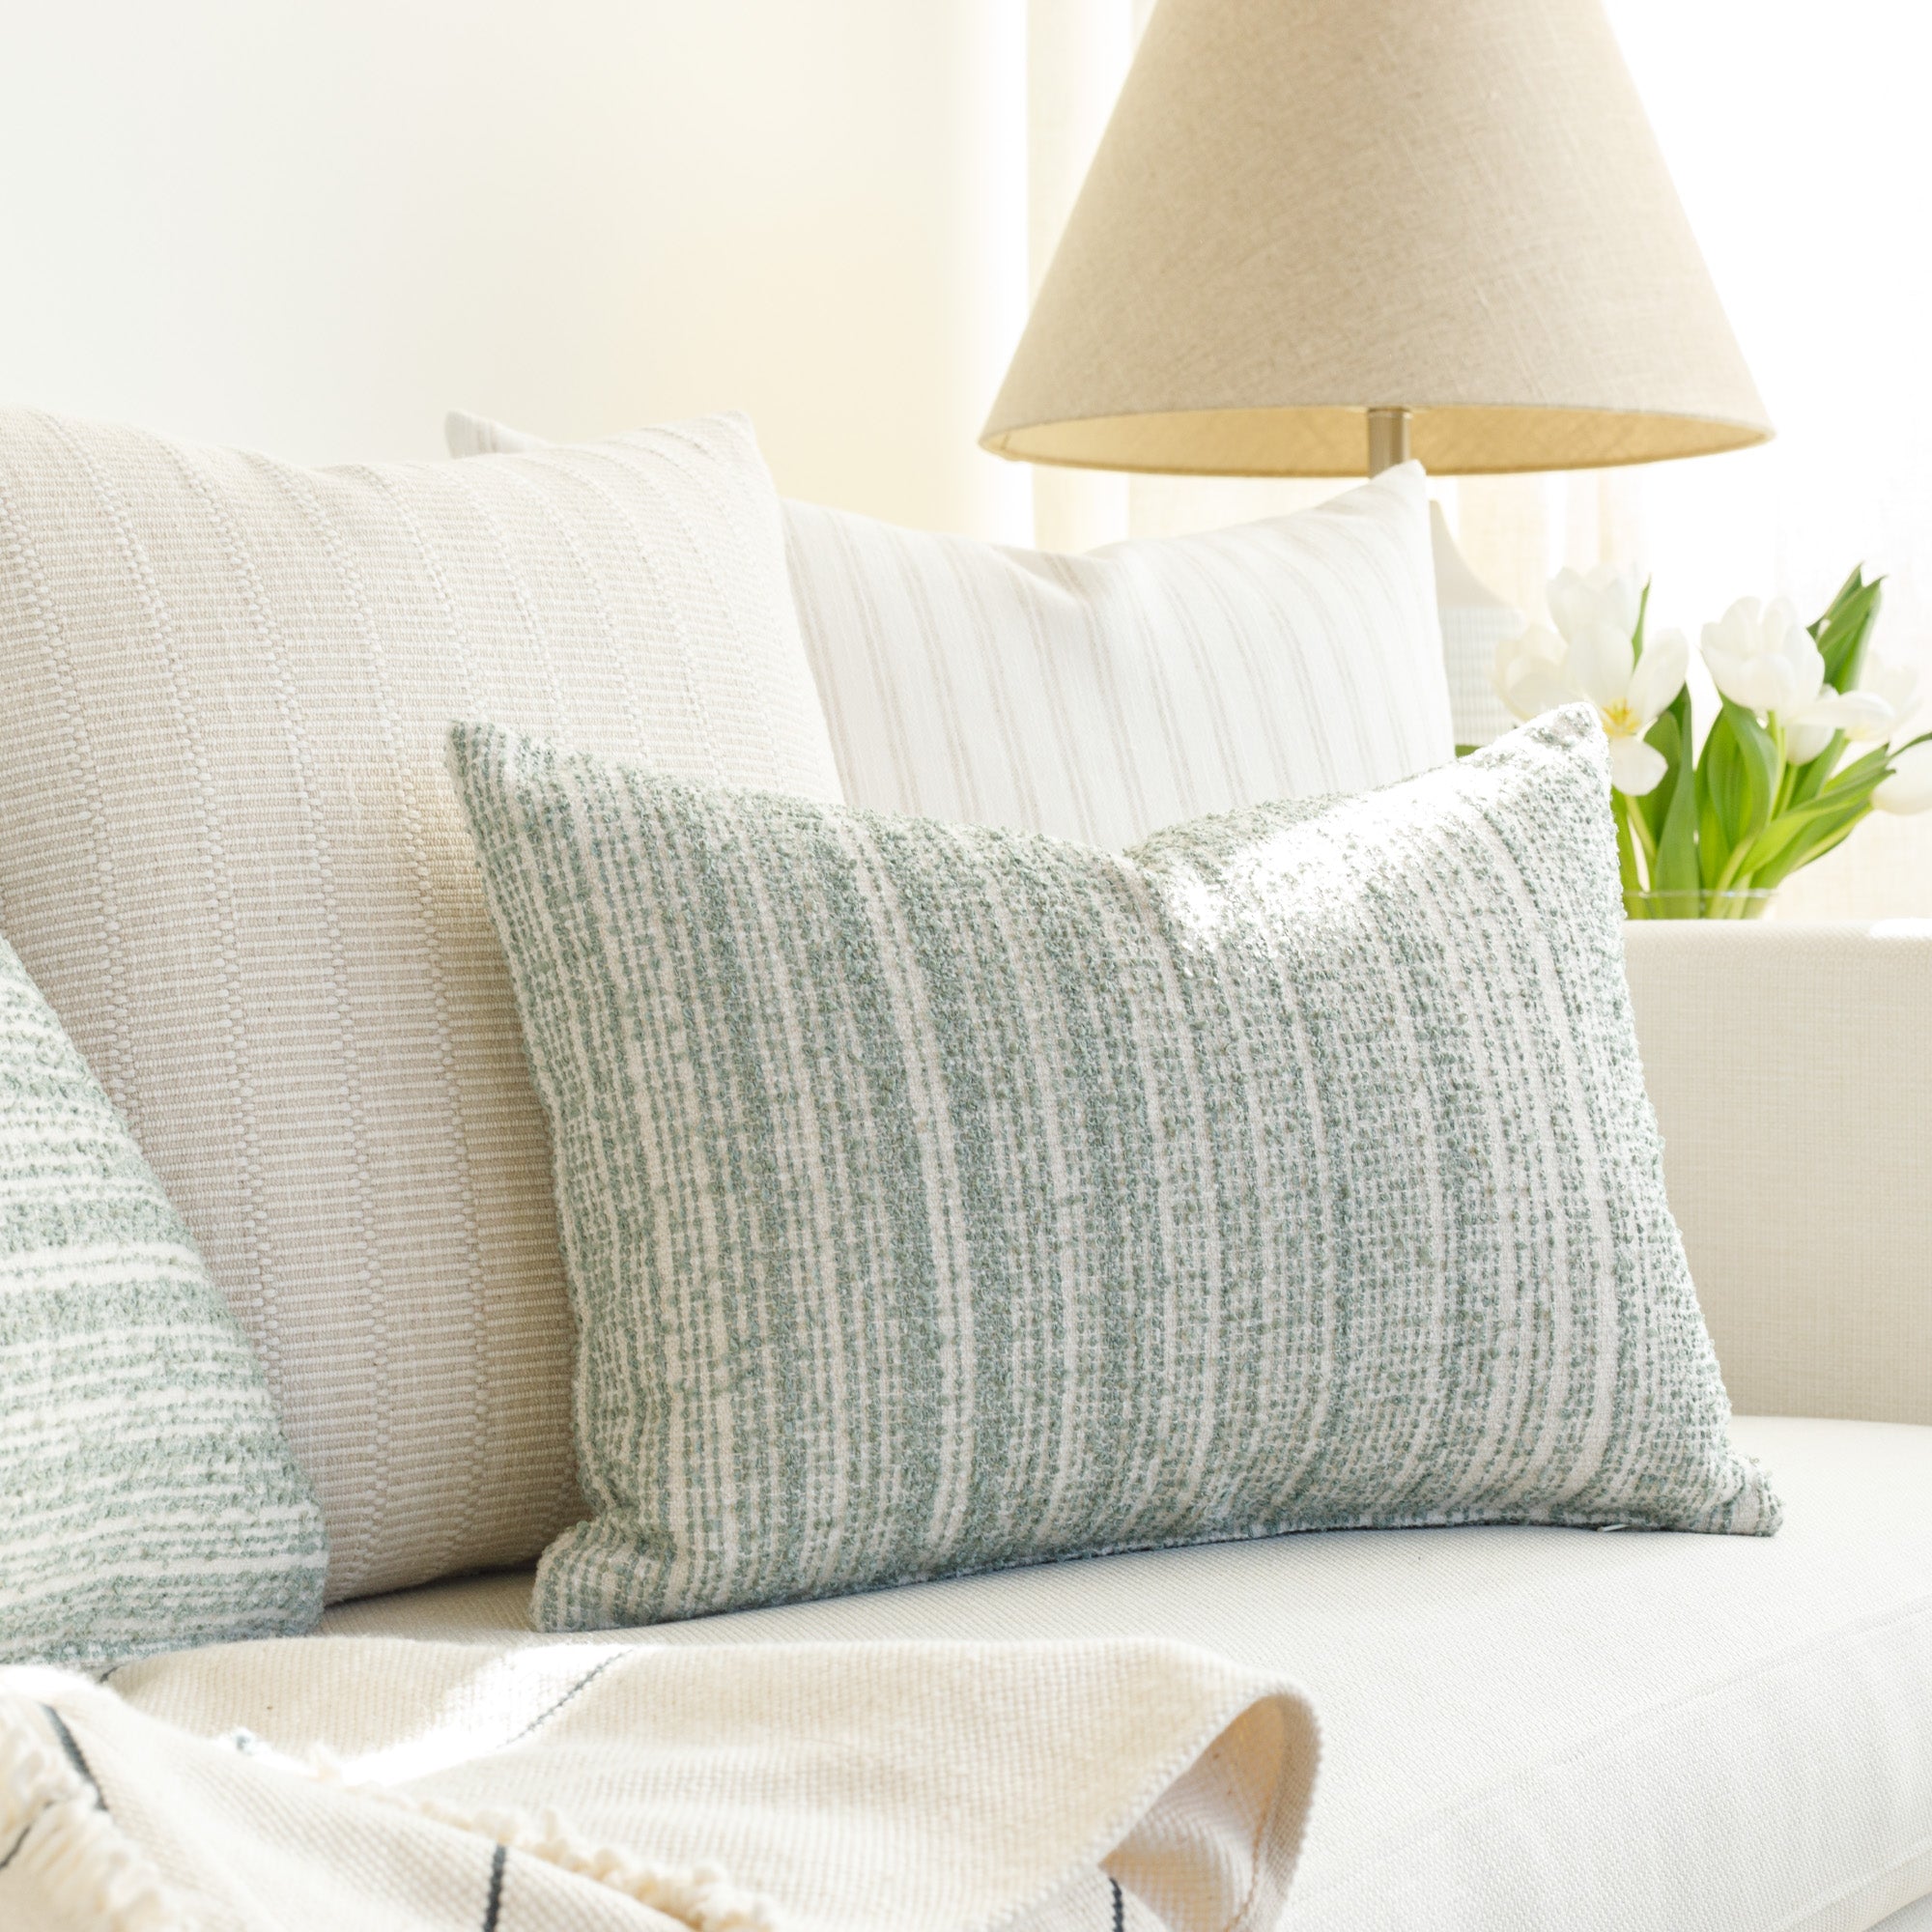 Jade and soft white throw pillows from Tonic Living